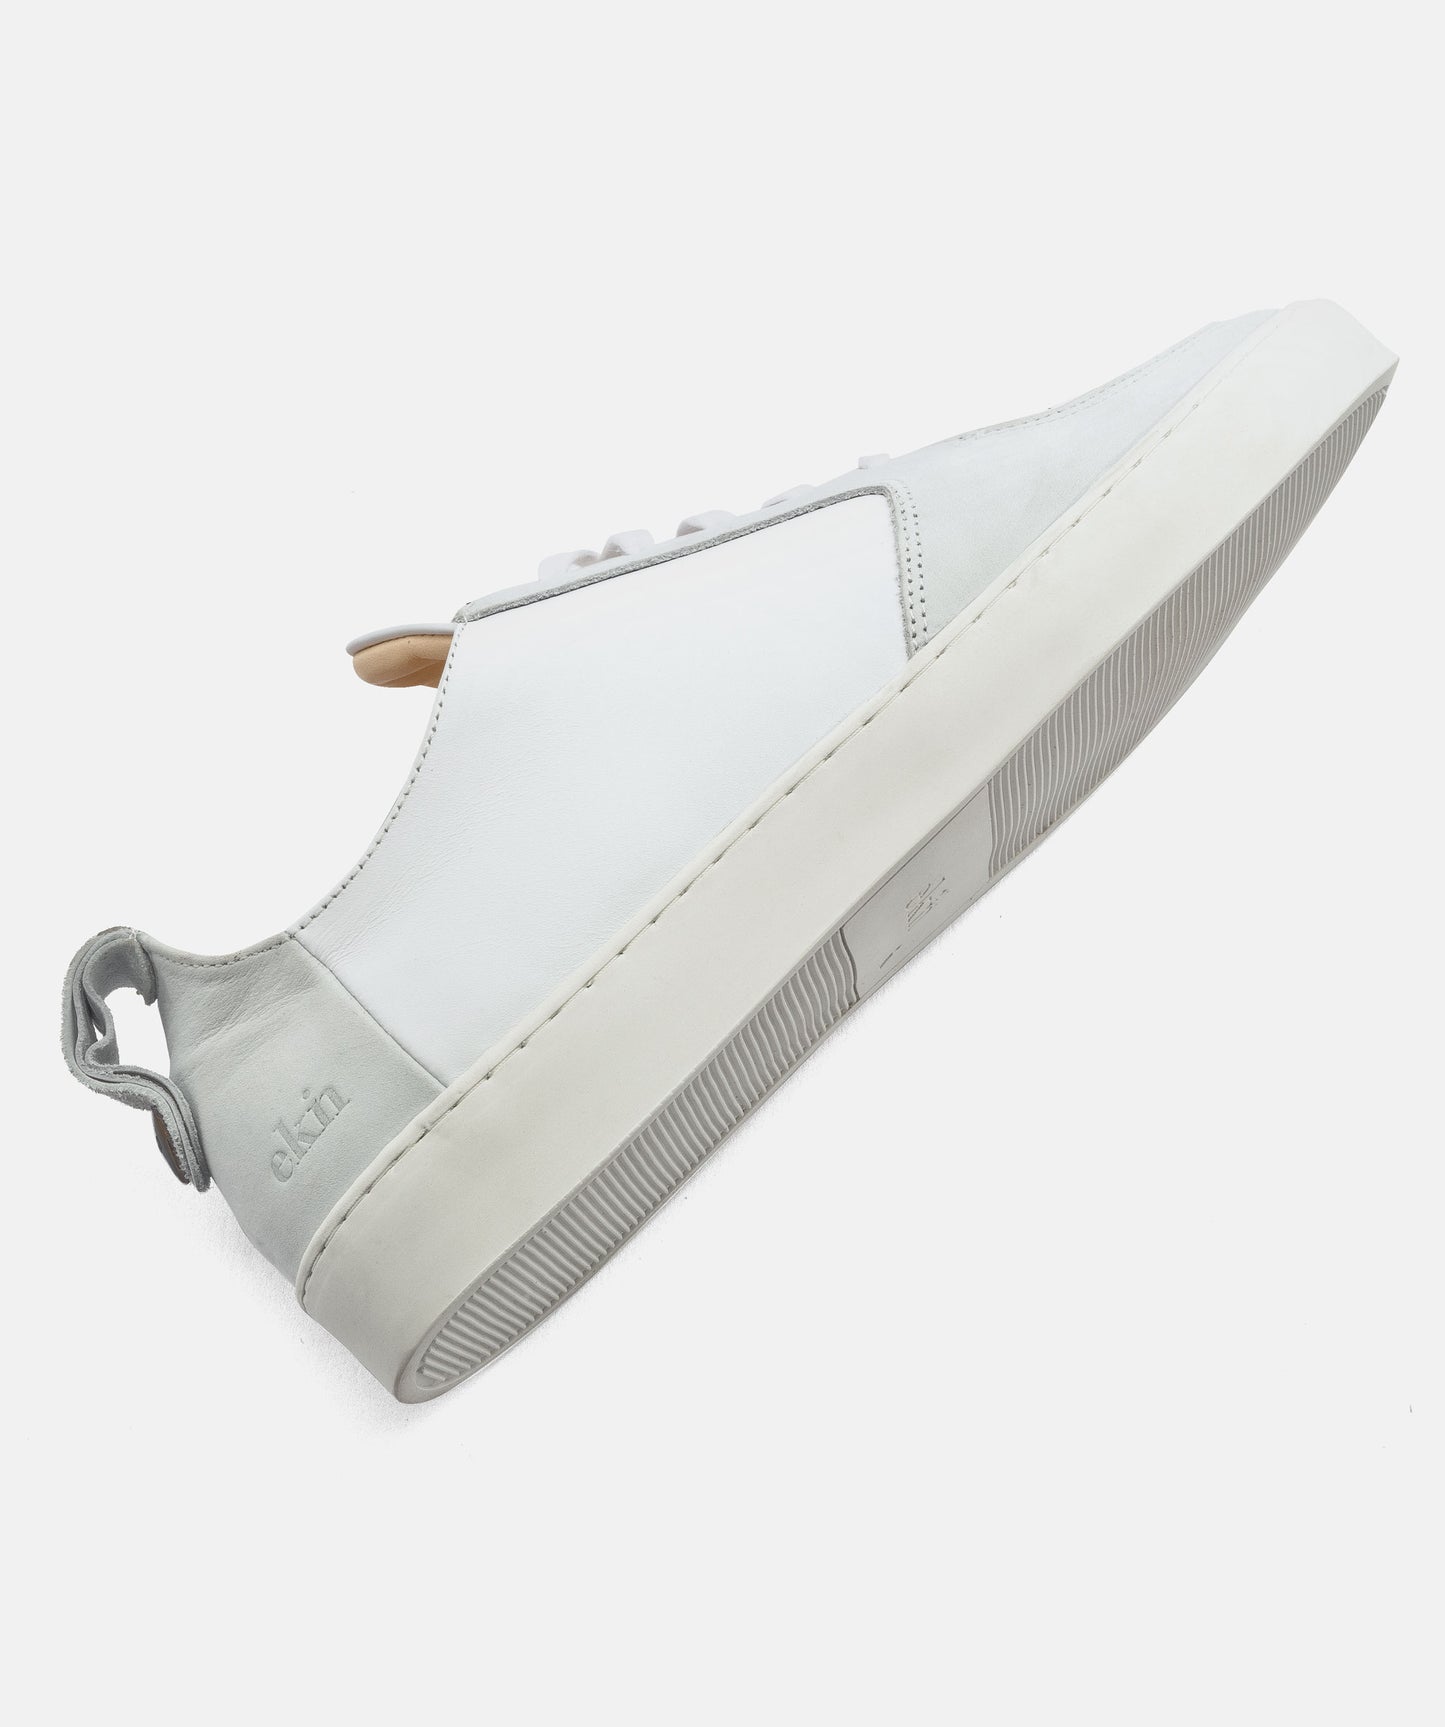 MAX HERRE ARGAN LOW - White Leather & White Sole